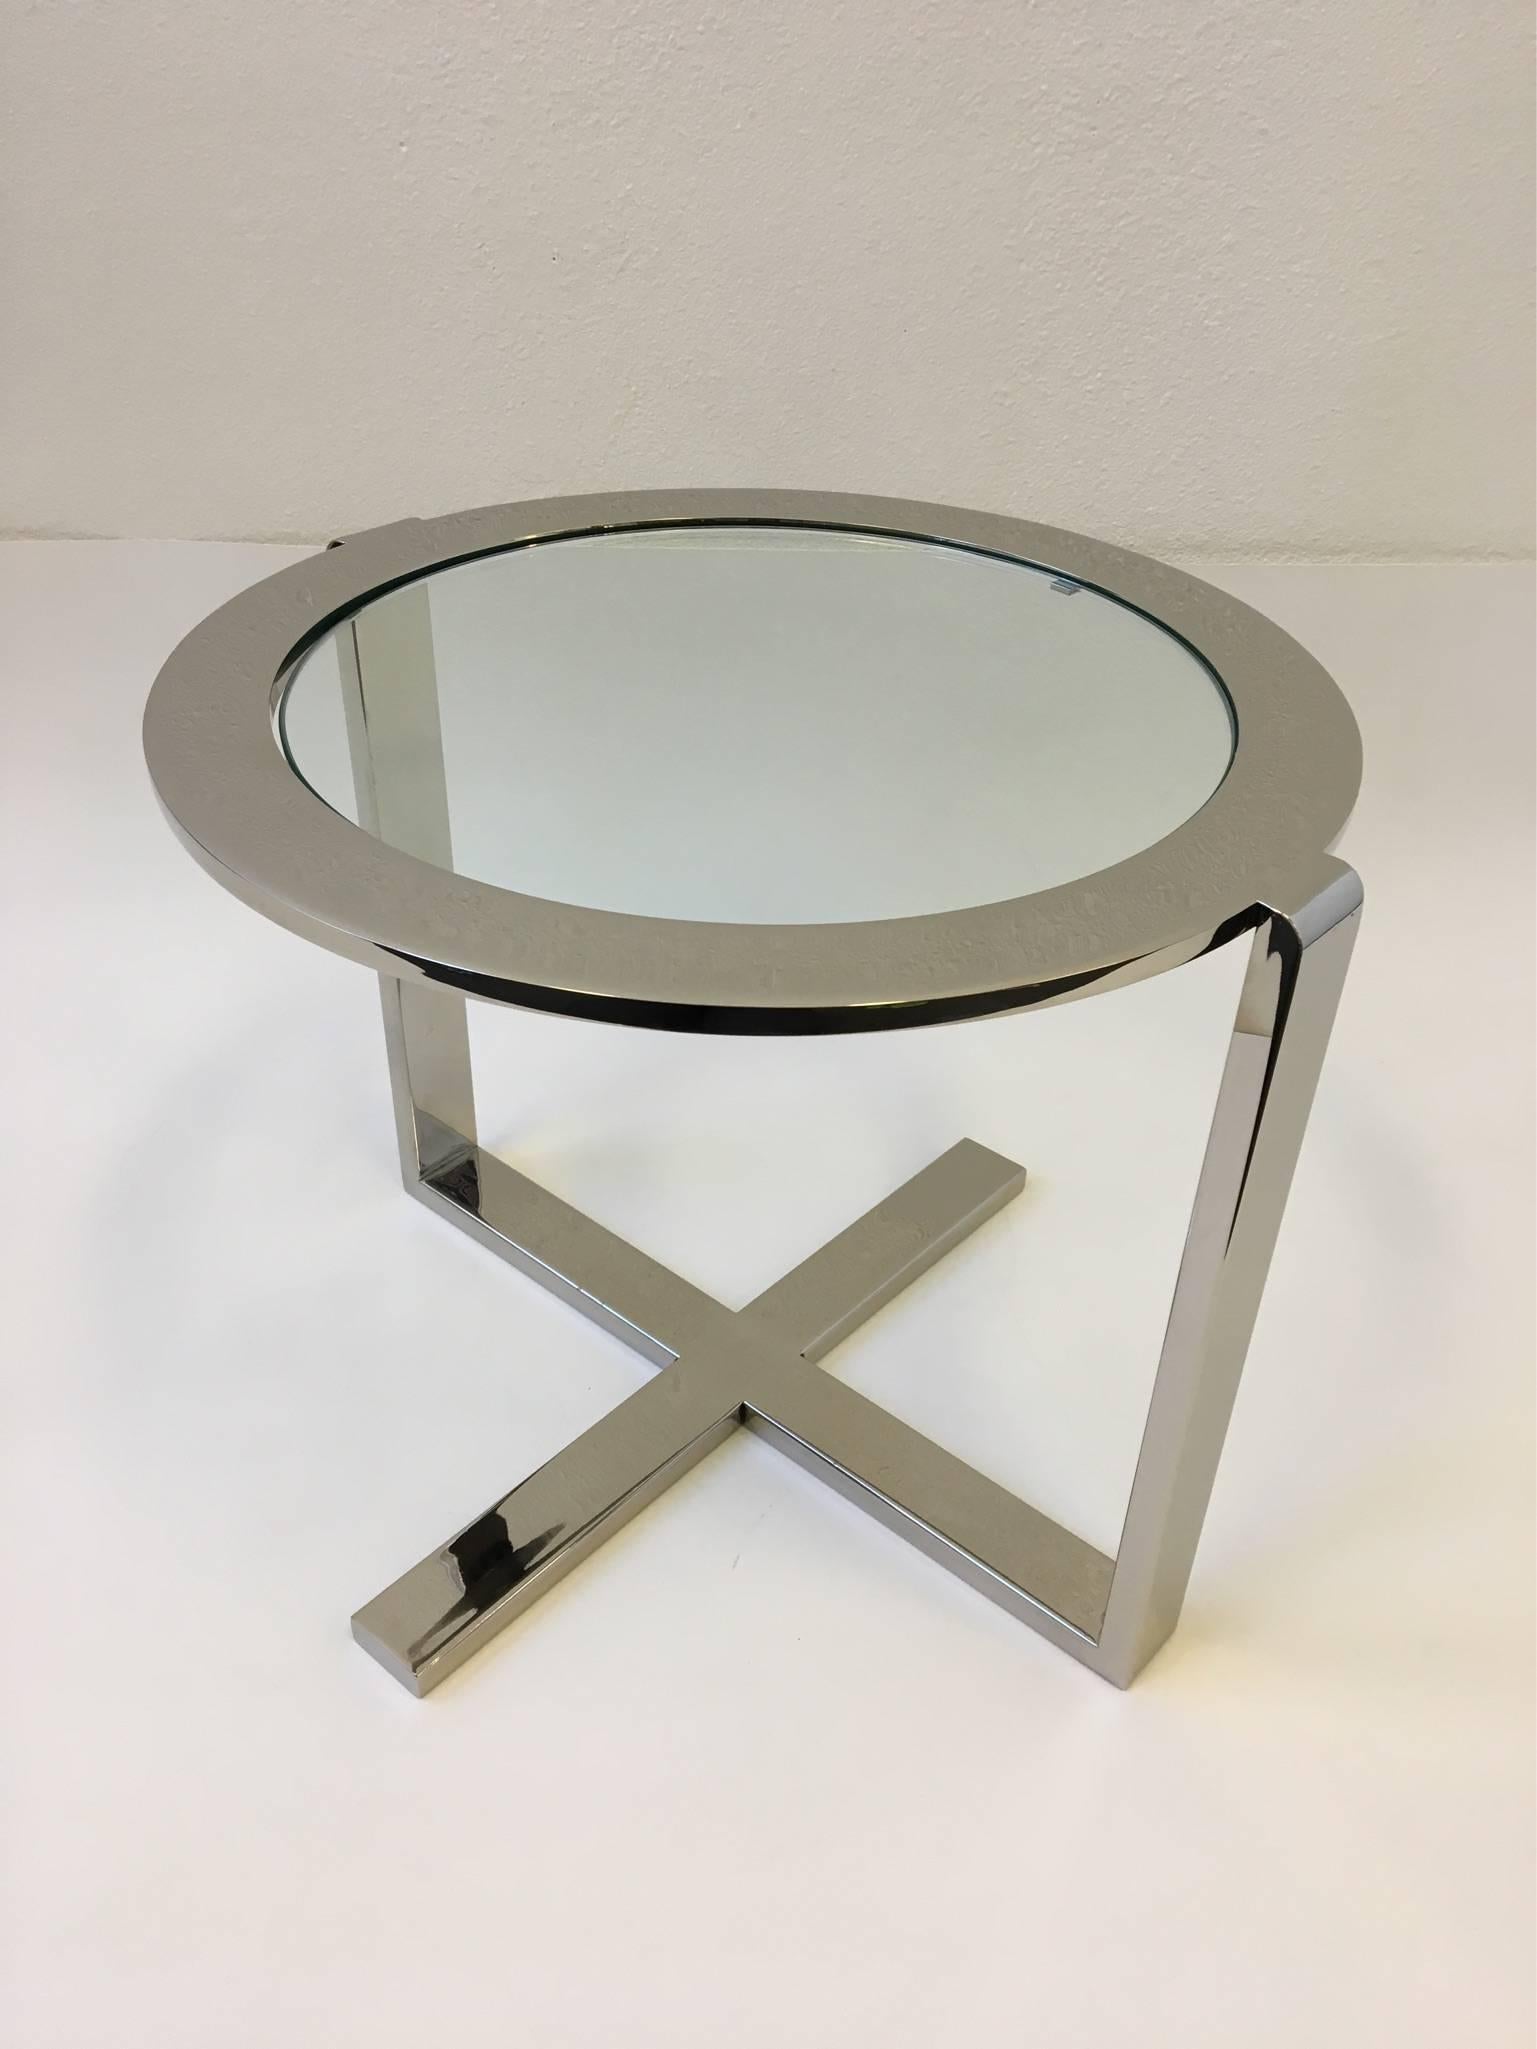 A cool polished nickel and glass side table from 1970s.
The table is well constructed the round top is solid steel. Newly re-plated in a polished nickel finish and new glass.
This came out of a glamorous Steve Chase designed home.
Dimensions: 17